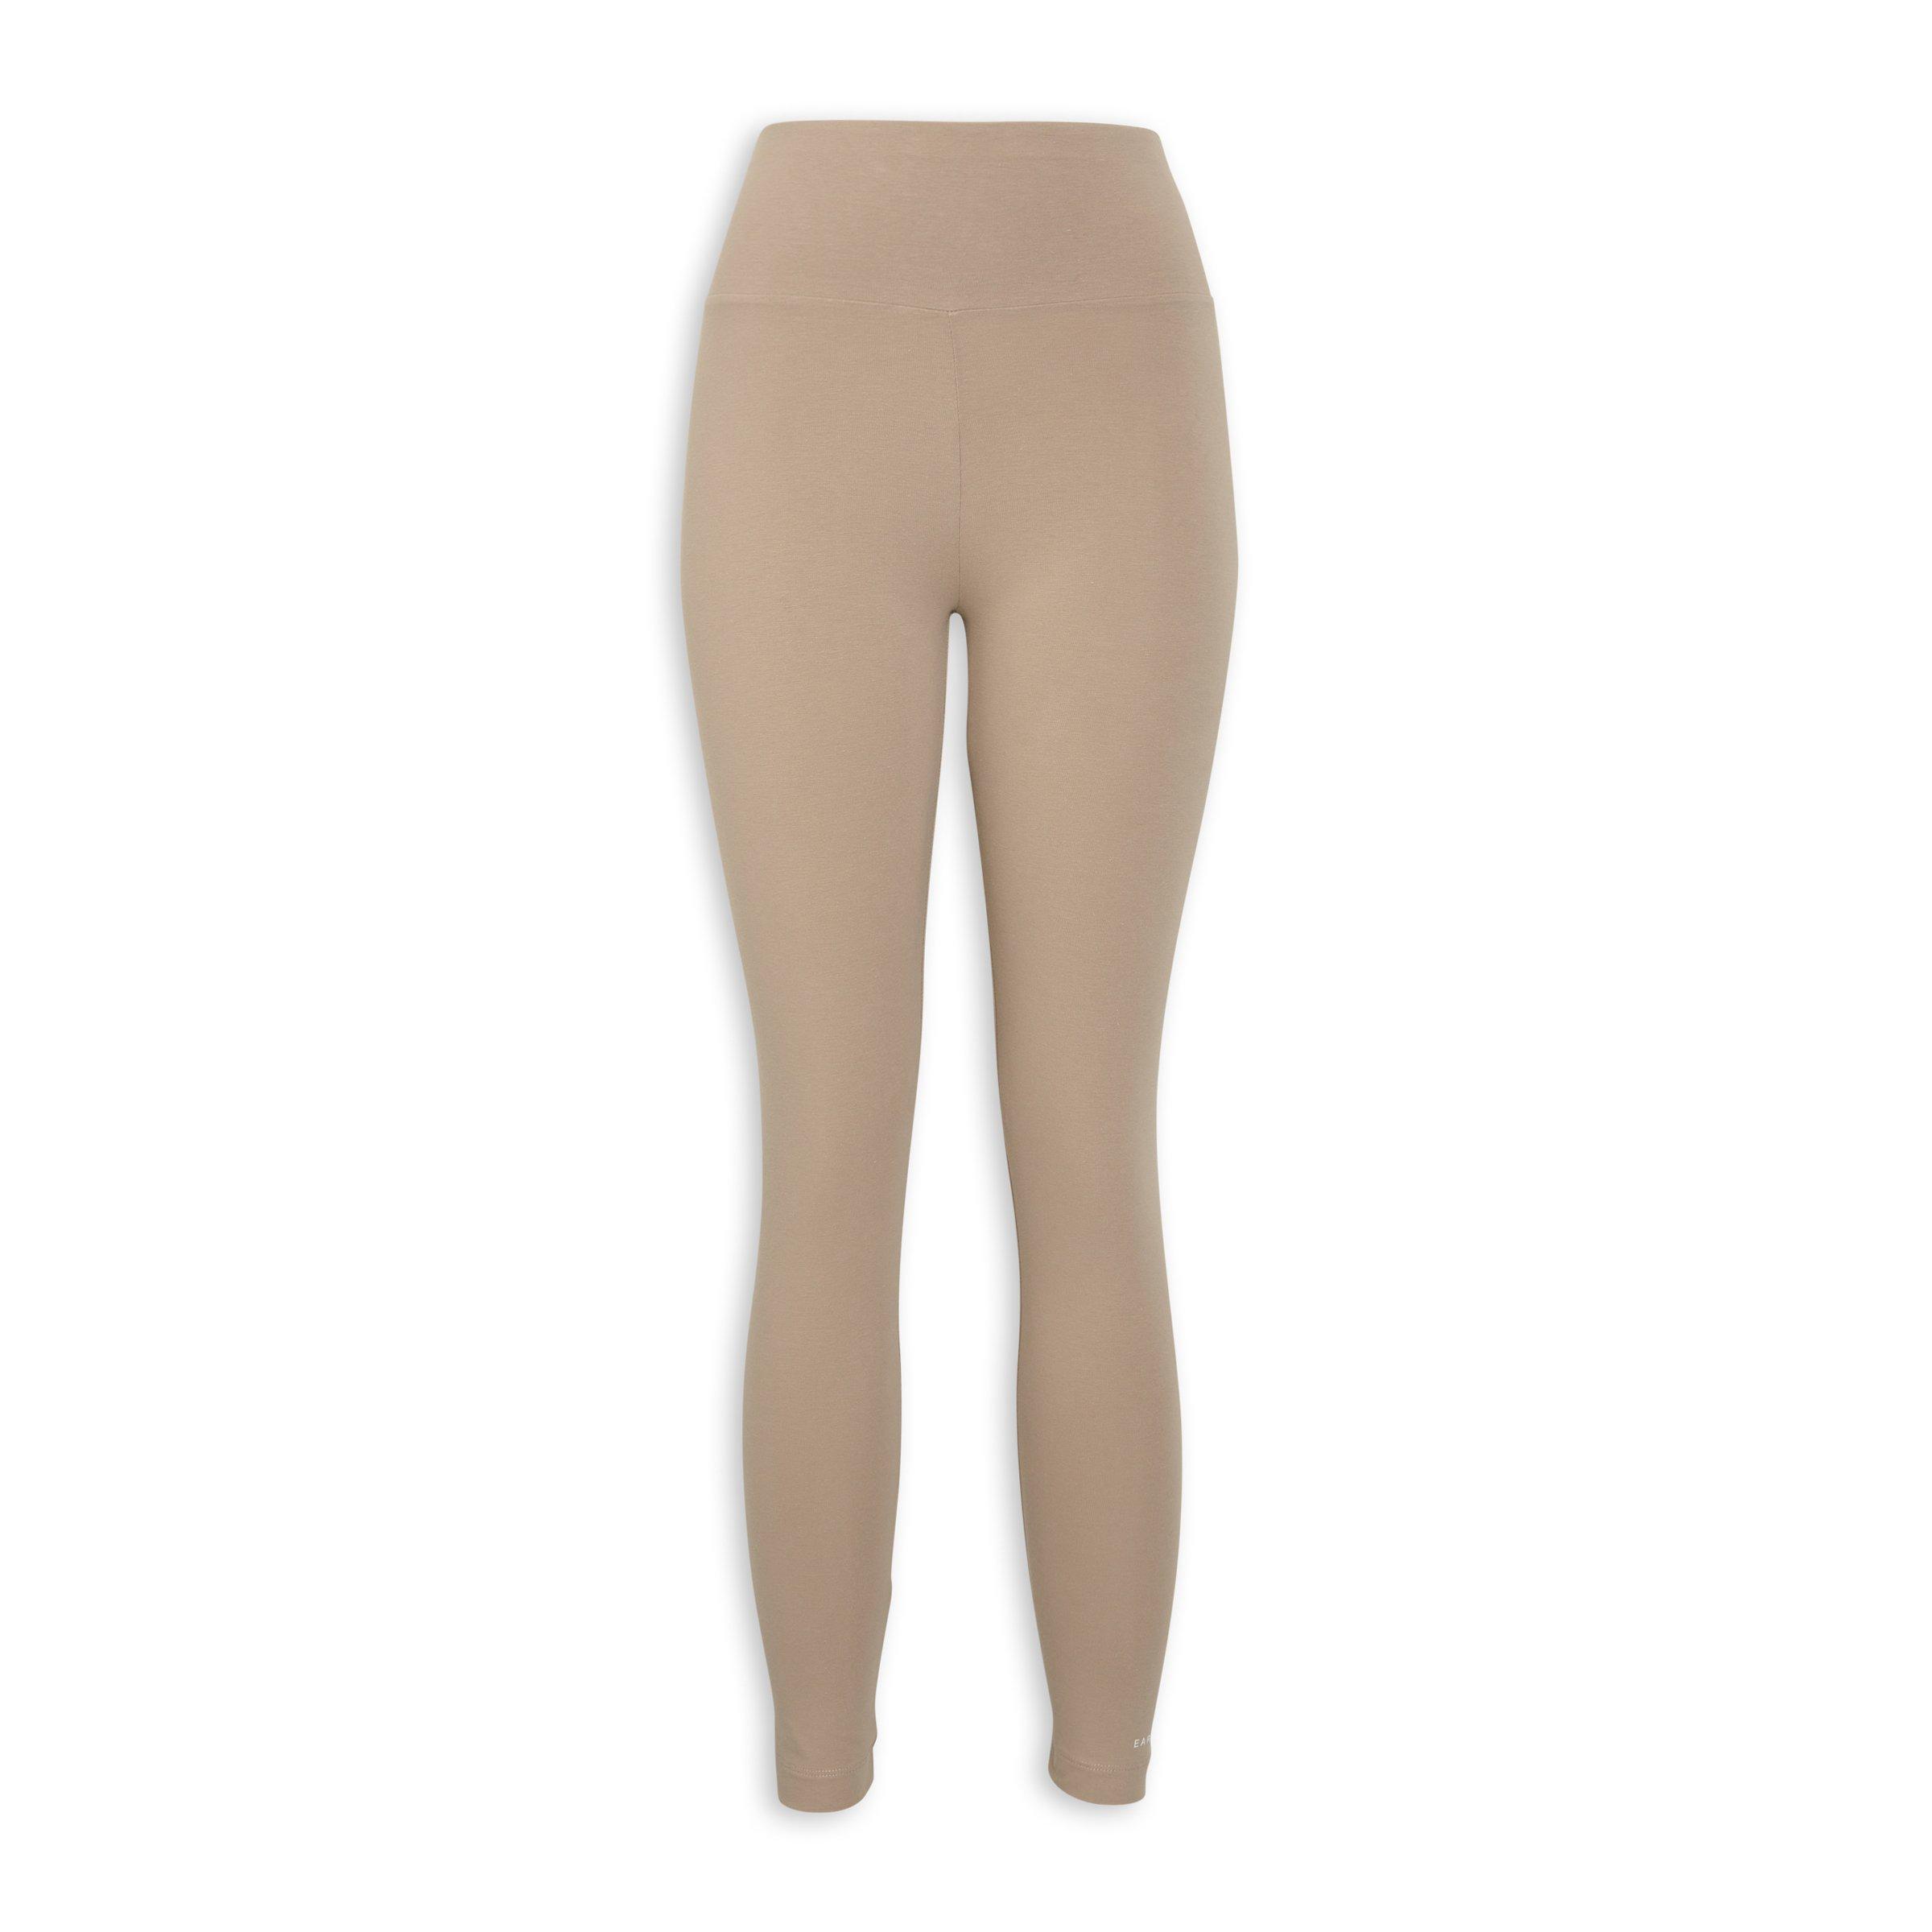 Women's Leggings for sale in Bloemspruit, Free State, South Africa